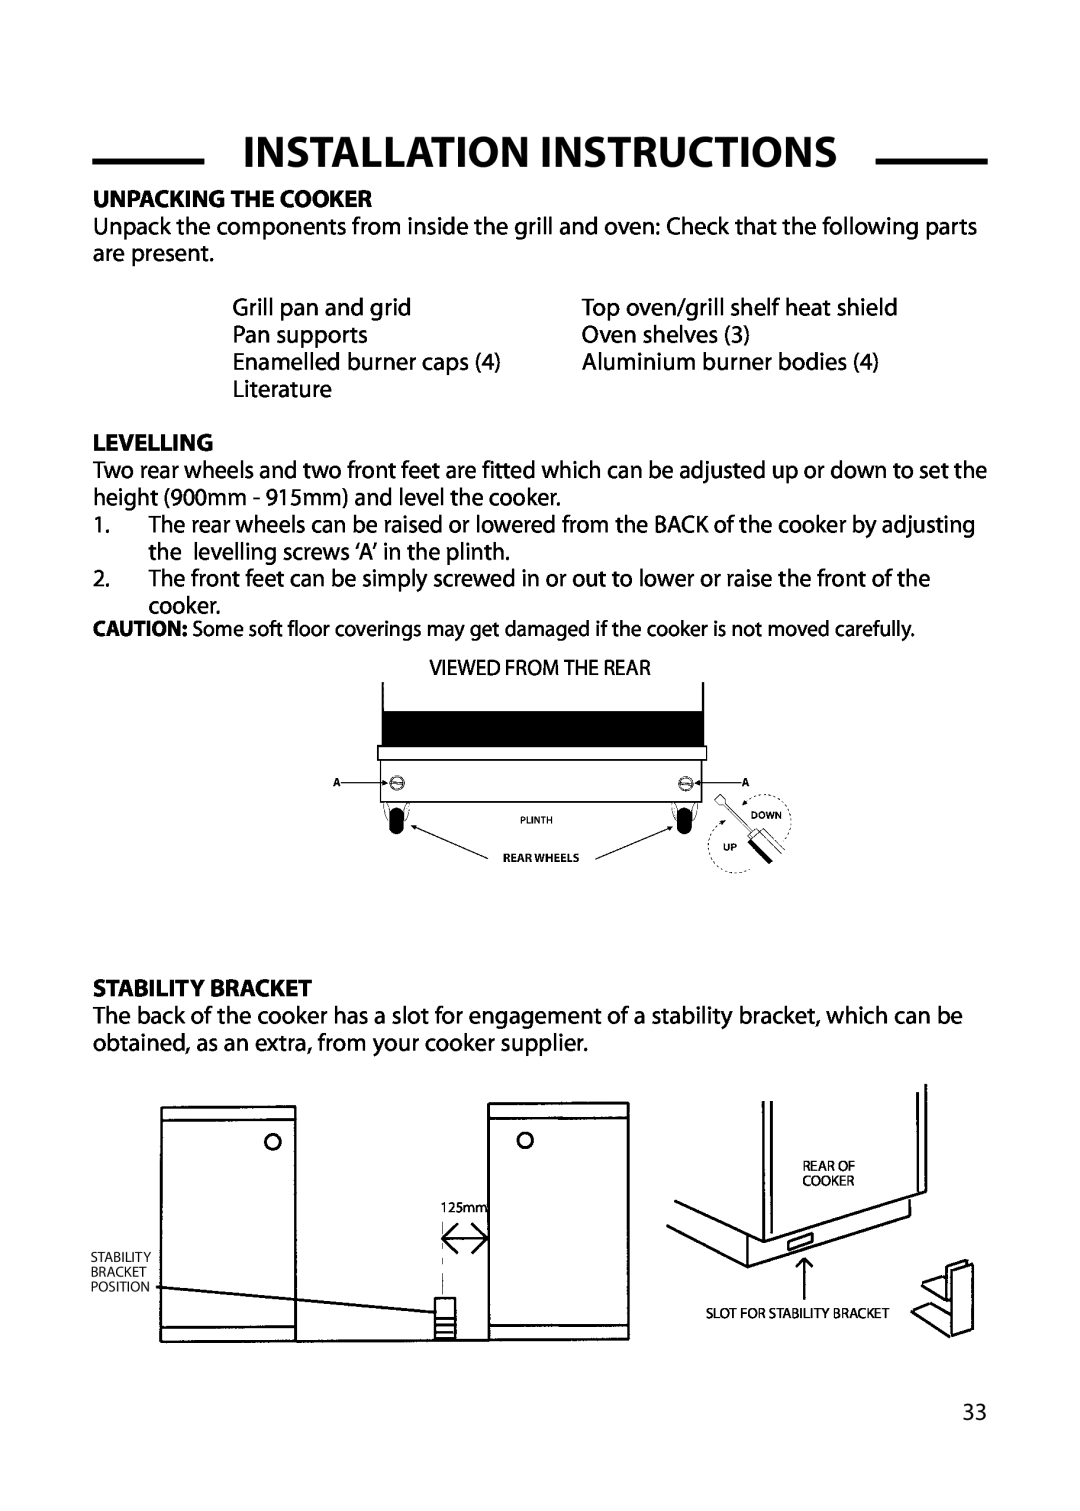 Hotpoint GW54, GW66, GW62, 6 DOG manual Unpacking The Cooker, Levelling, Stability Bracket, Installation Instructions 